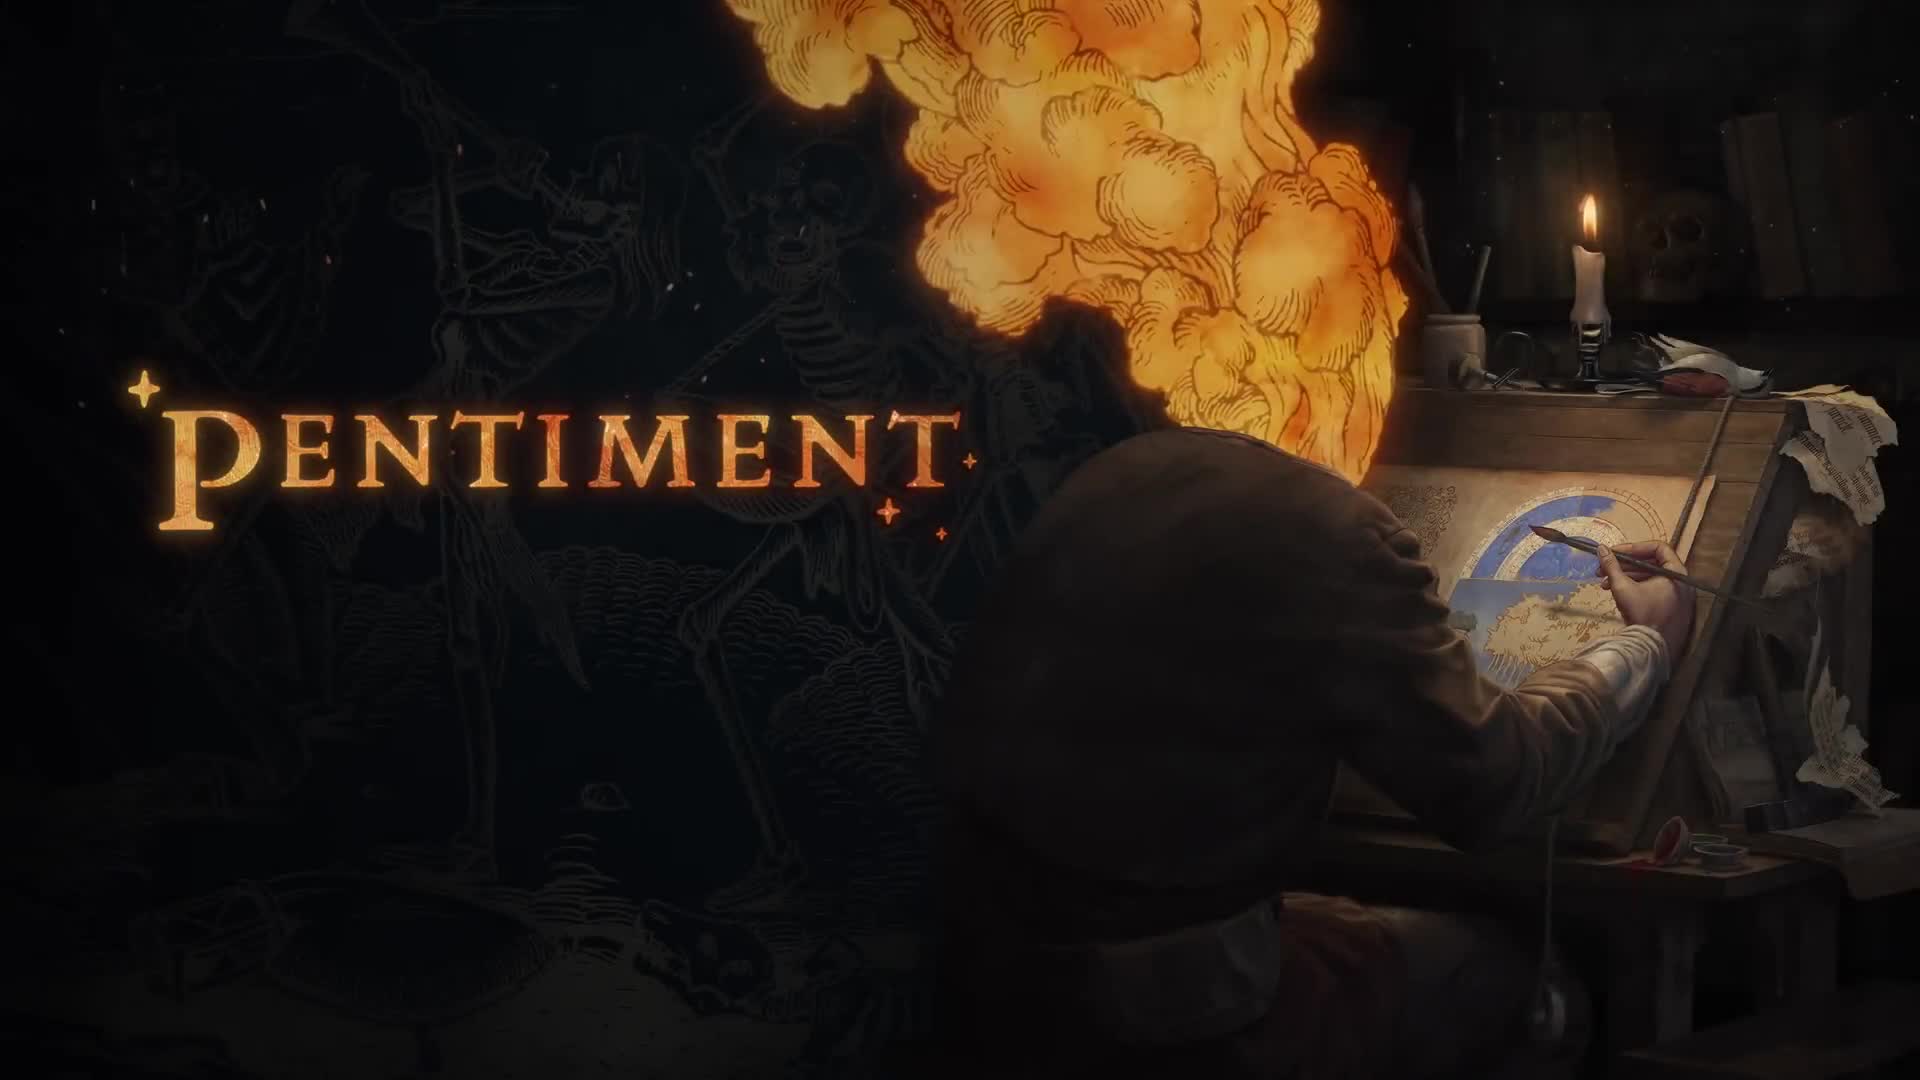 Pentiment: The Bayern adventure by Obsidian in the trailer